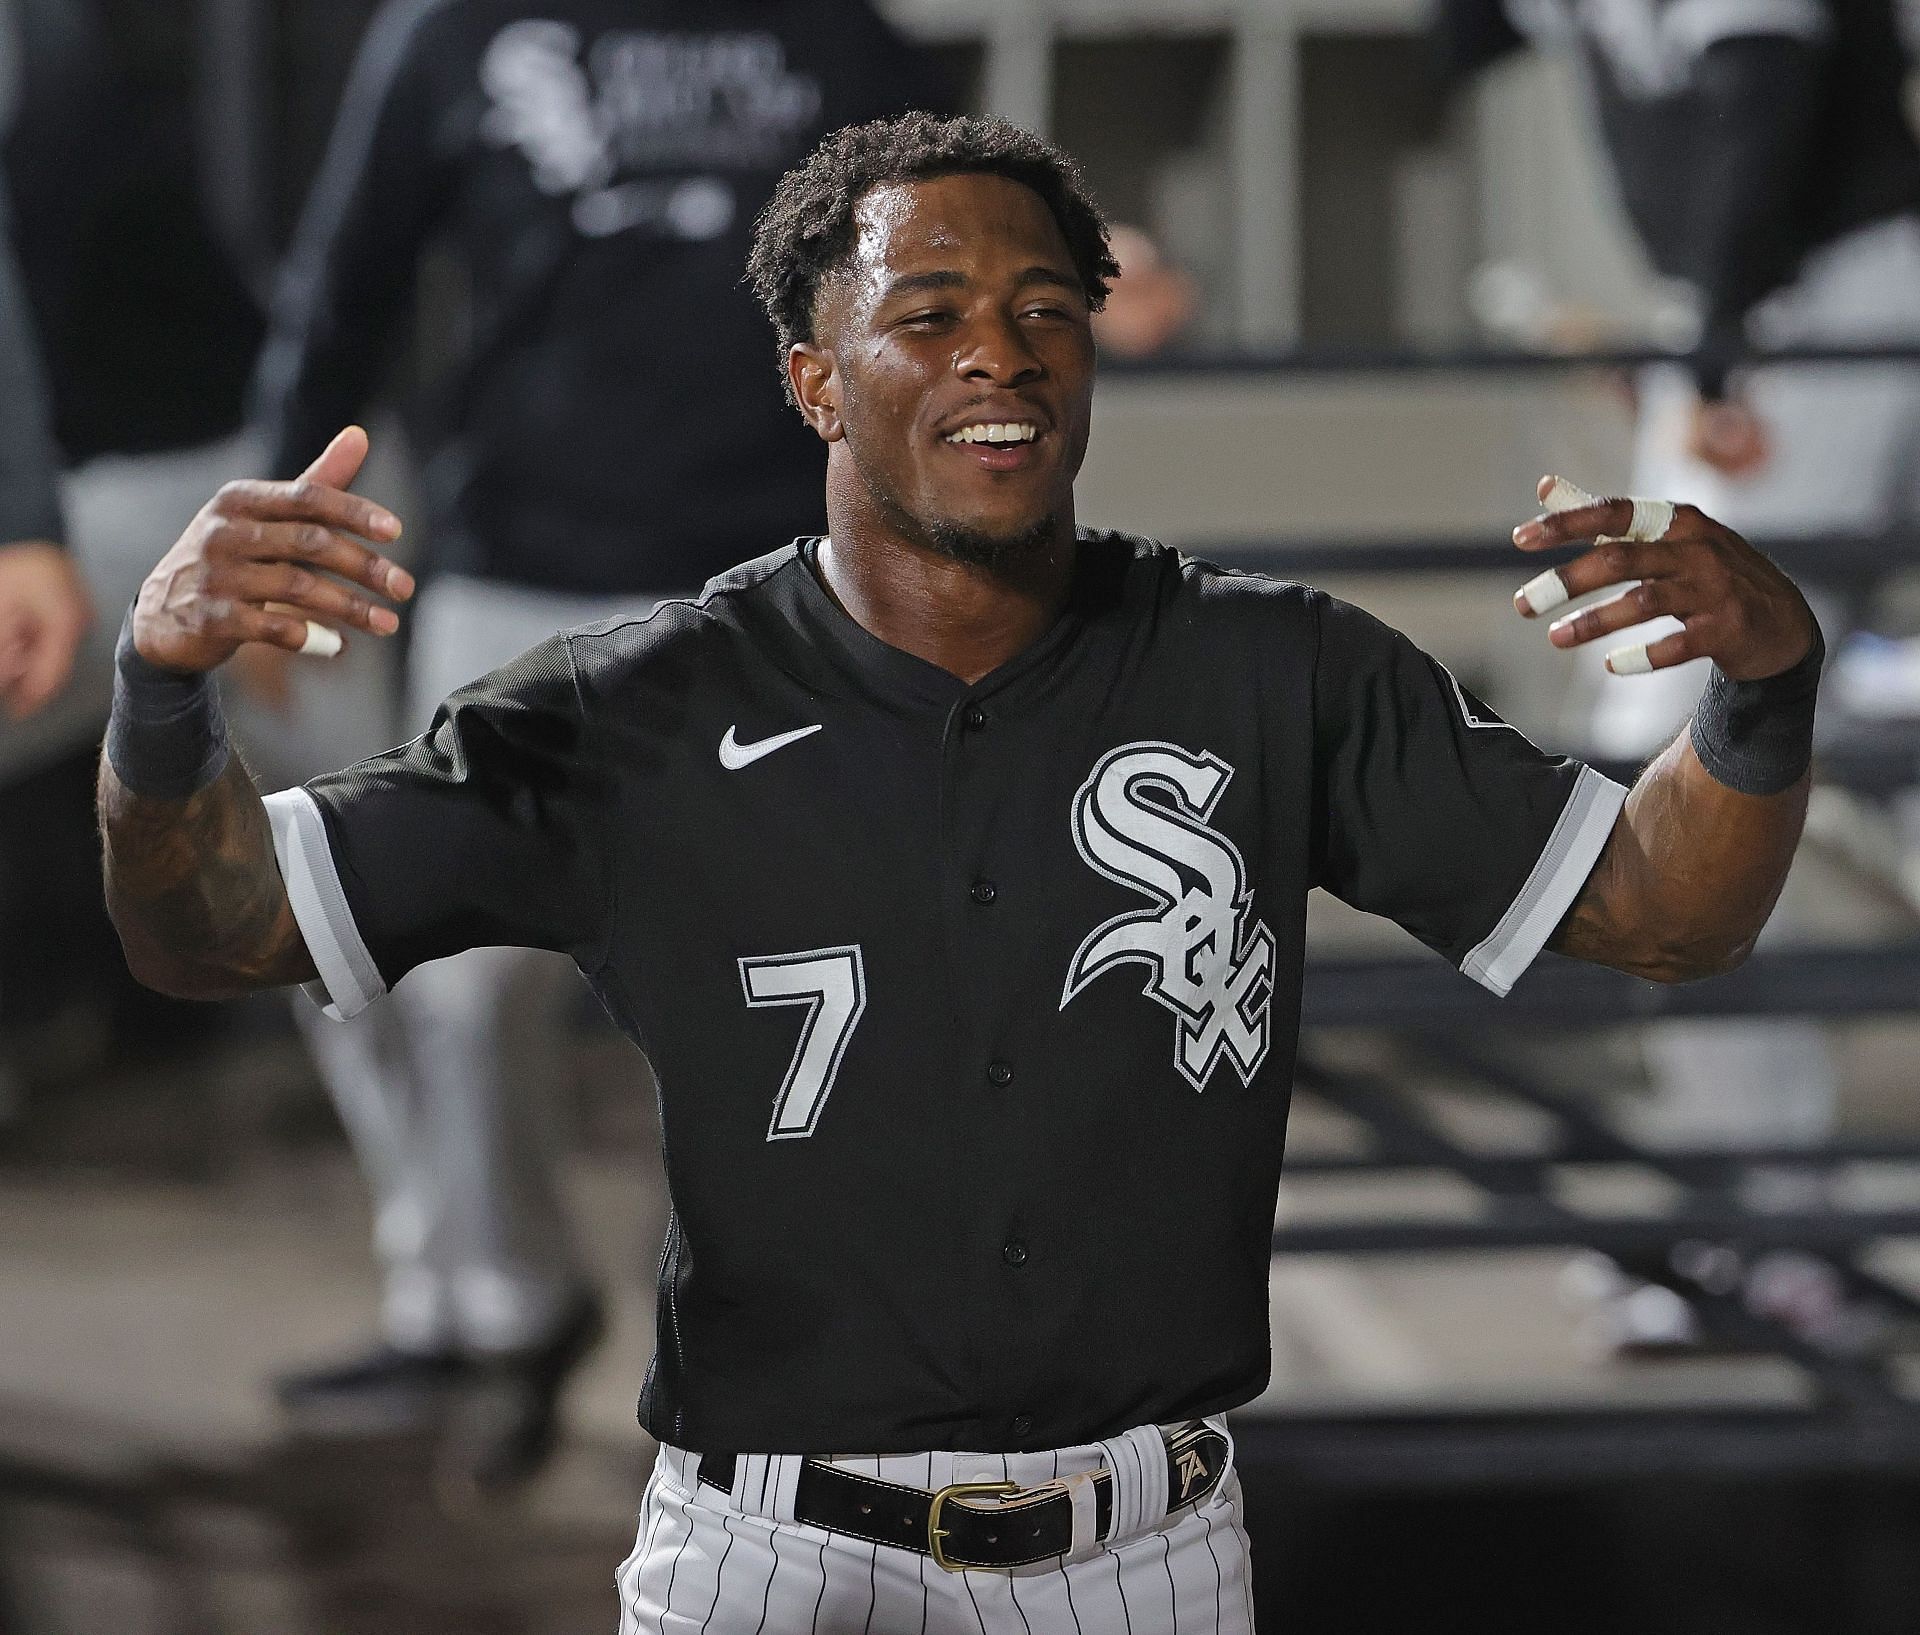 Chicago White Sox star Tim Anderson